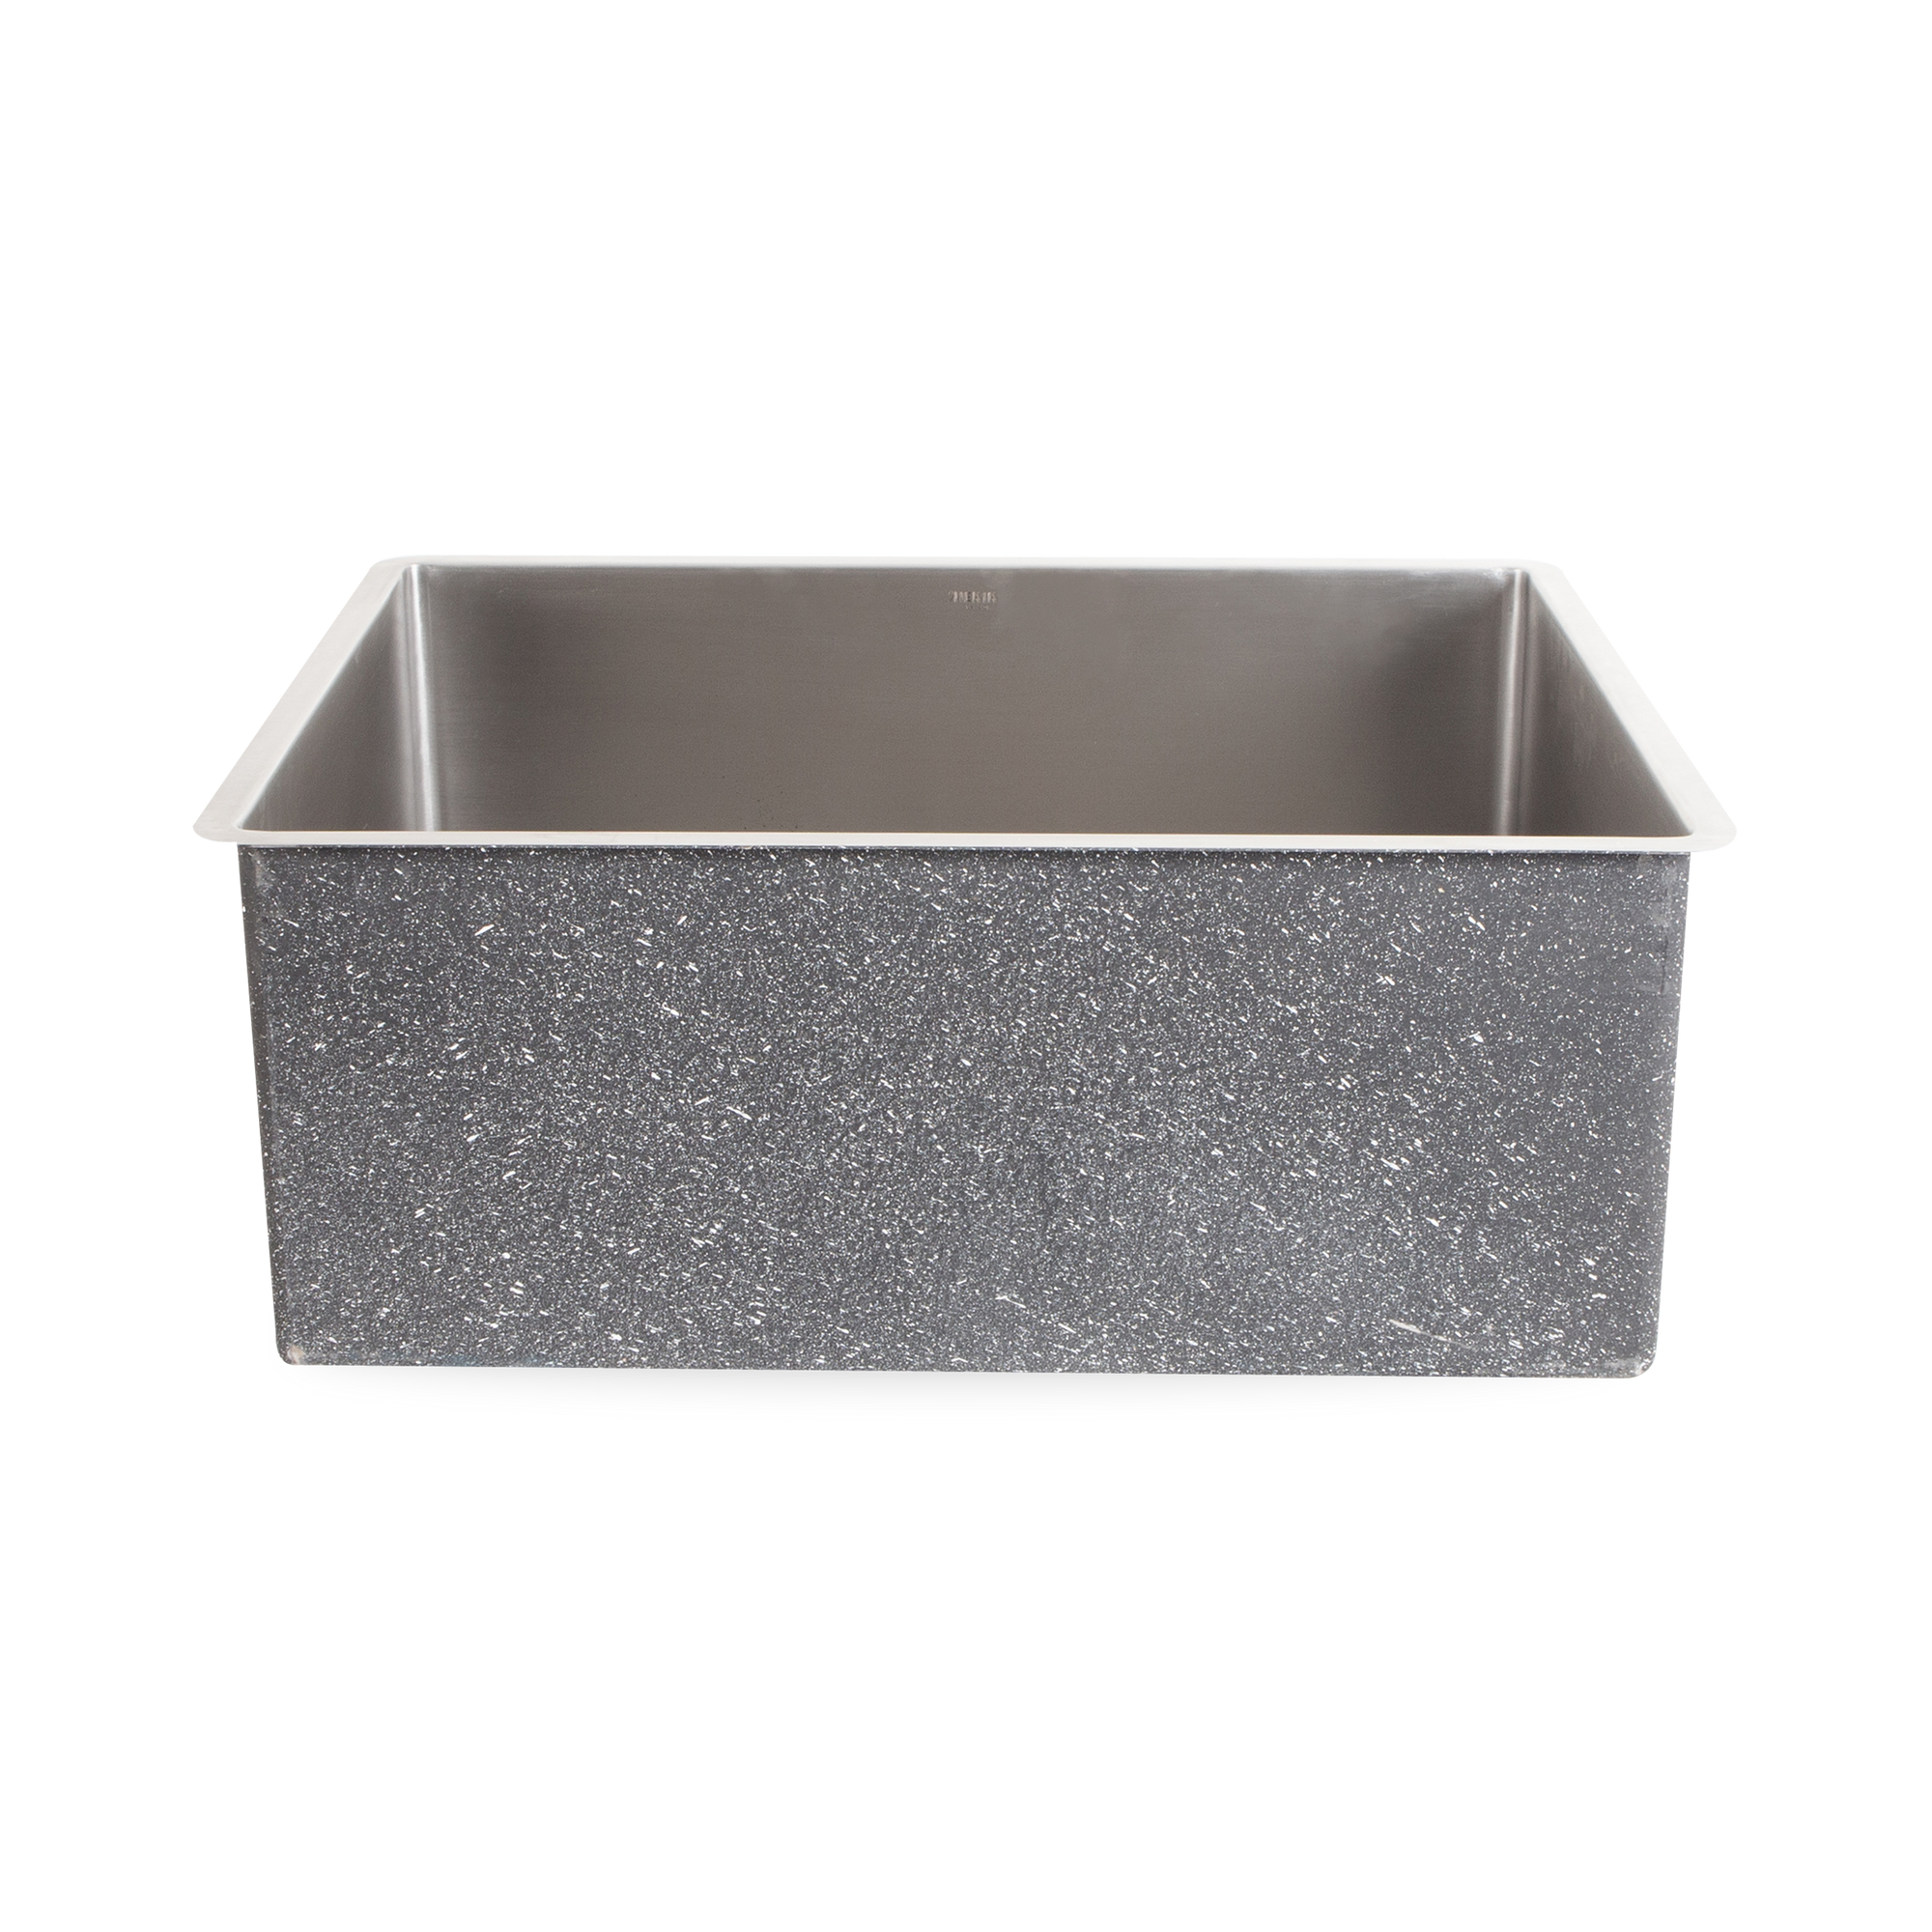 The Undermount sink is made of beautiful stainless steel featuring a single drain.